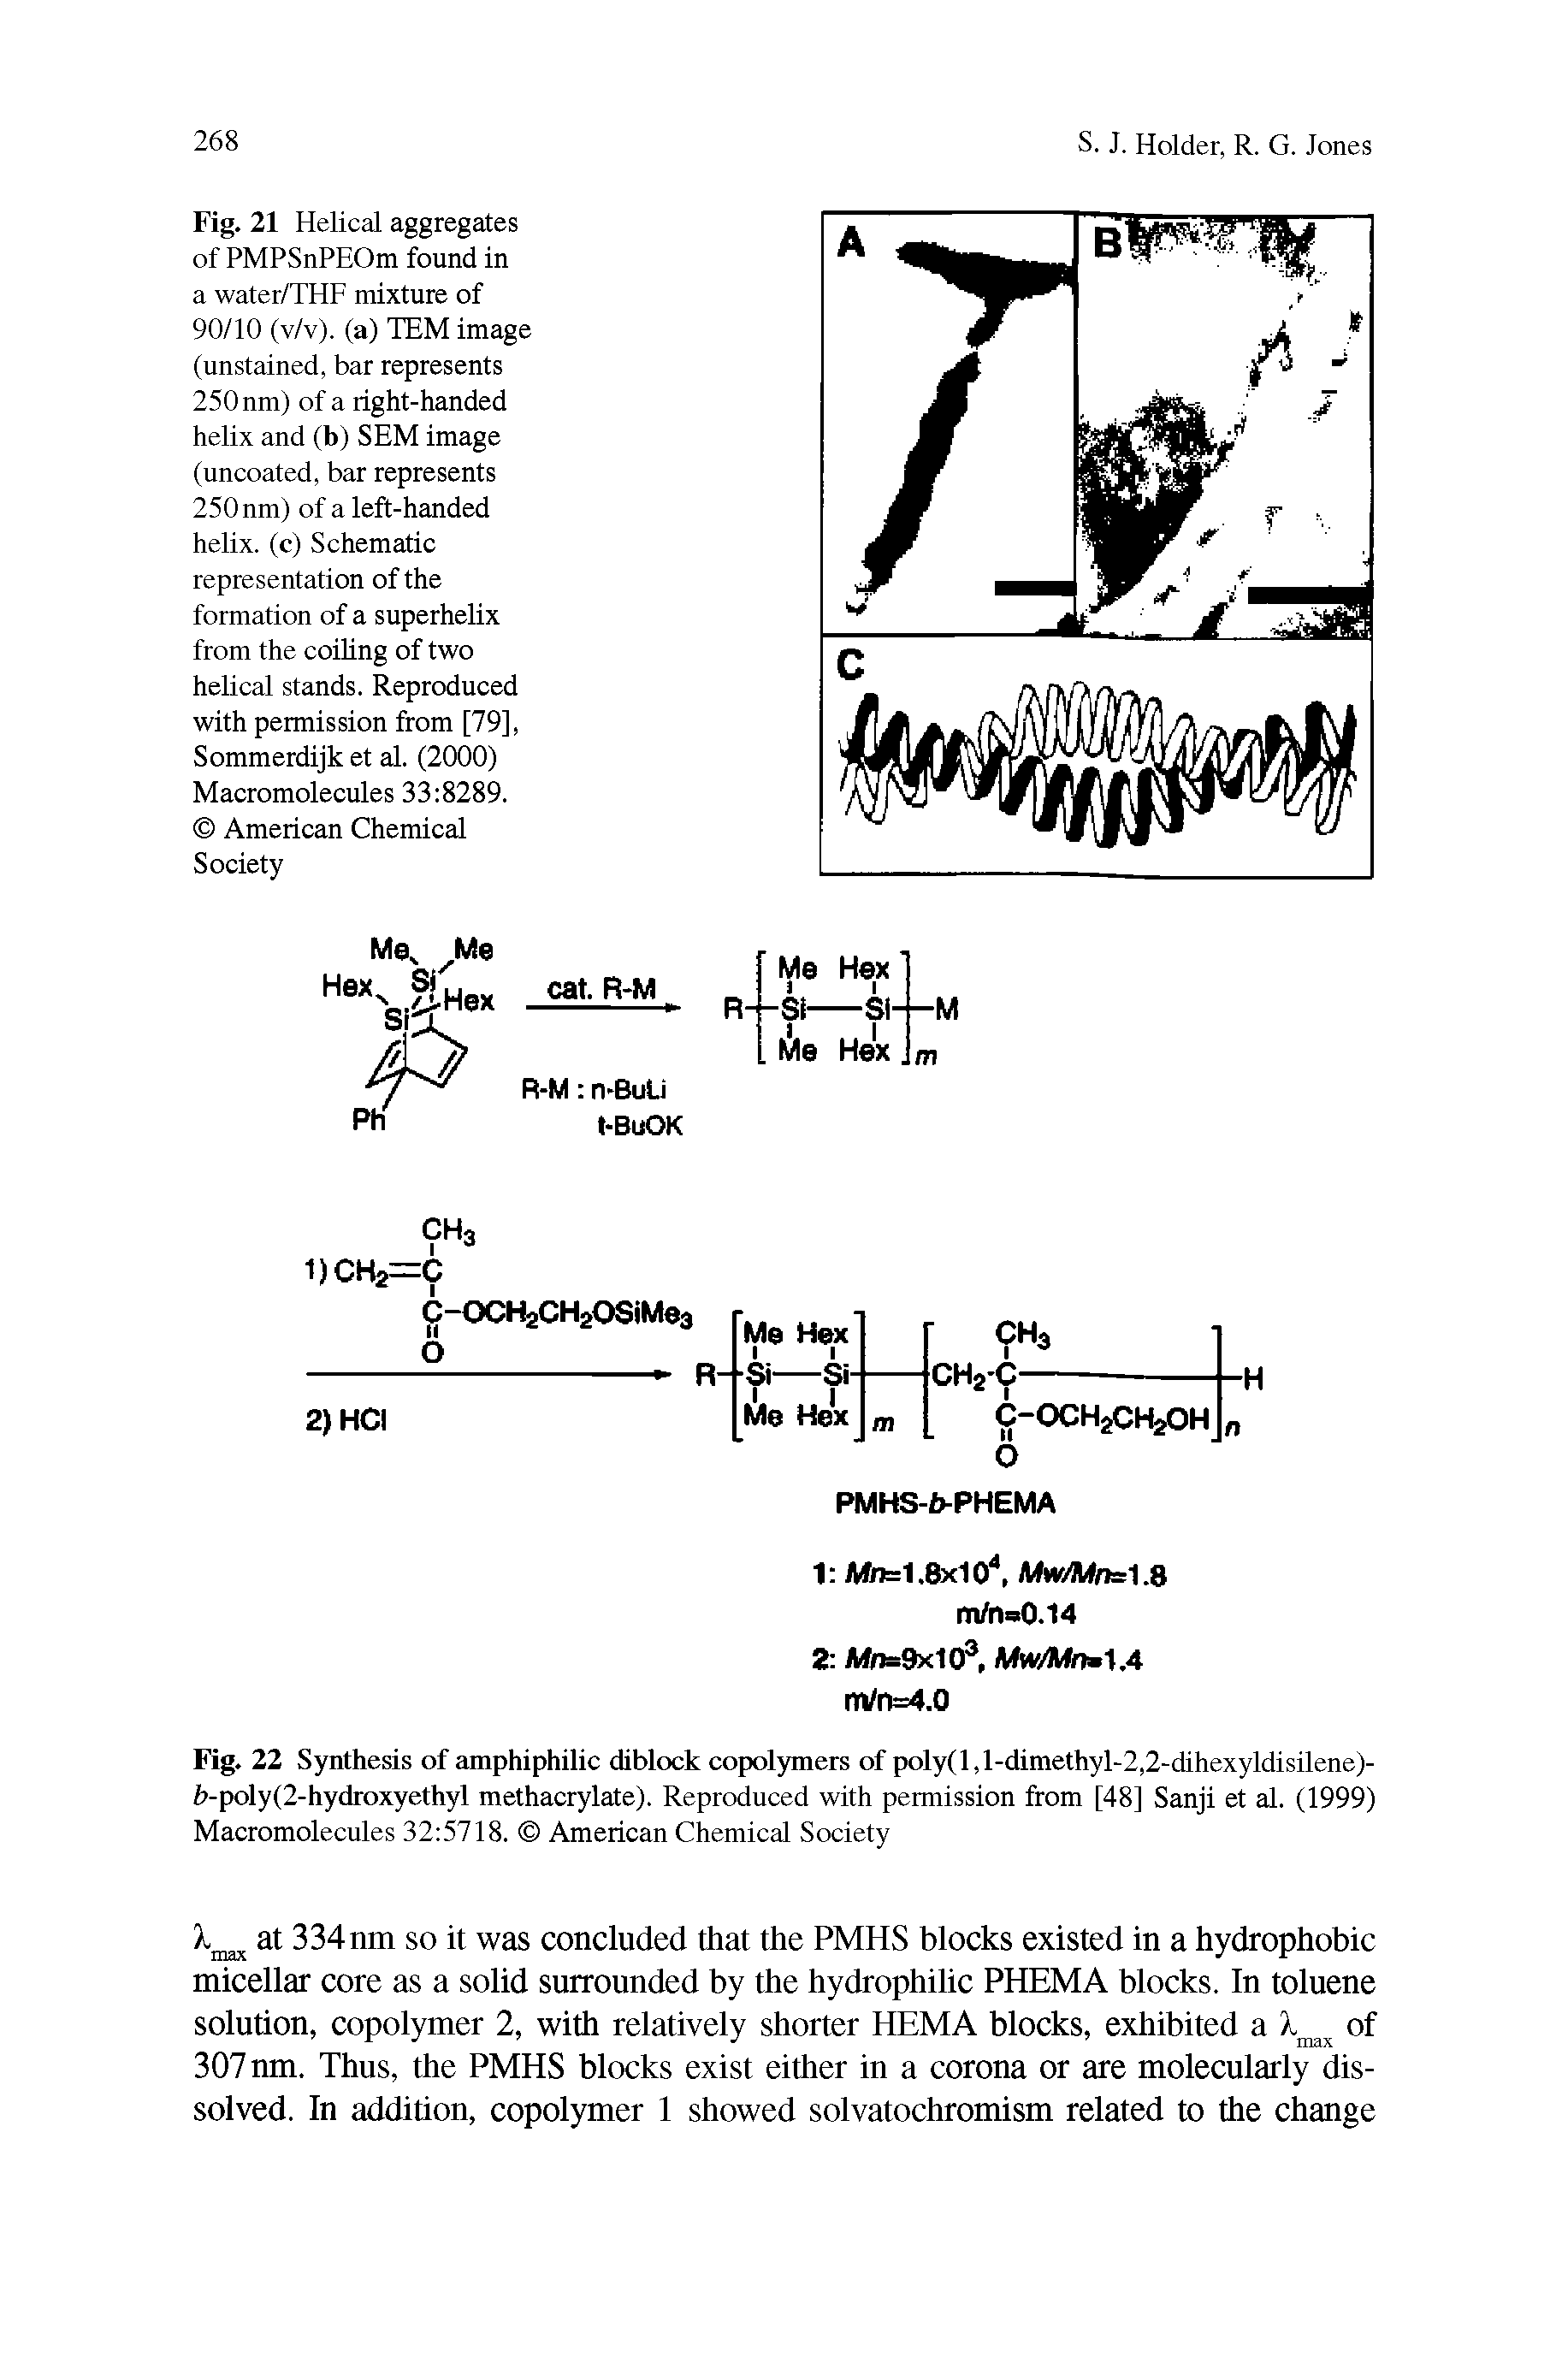 Fig. 22 Synthesis of amphiphilic diblock copolymers of poly(l,l-dimethyl-2,2-dihexyldisilene)-i>-poly(2-hydroxyethyl methacrylate). Reproduced with permission from [48] Sanji et al. (1999) Macromolecules 32 5718. American Chemical Society...